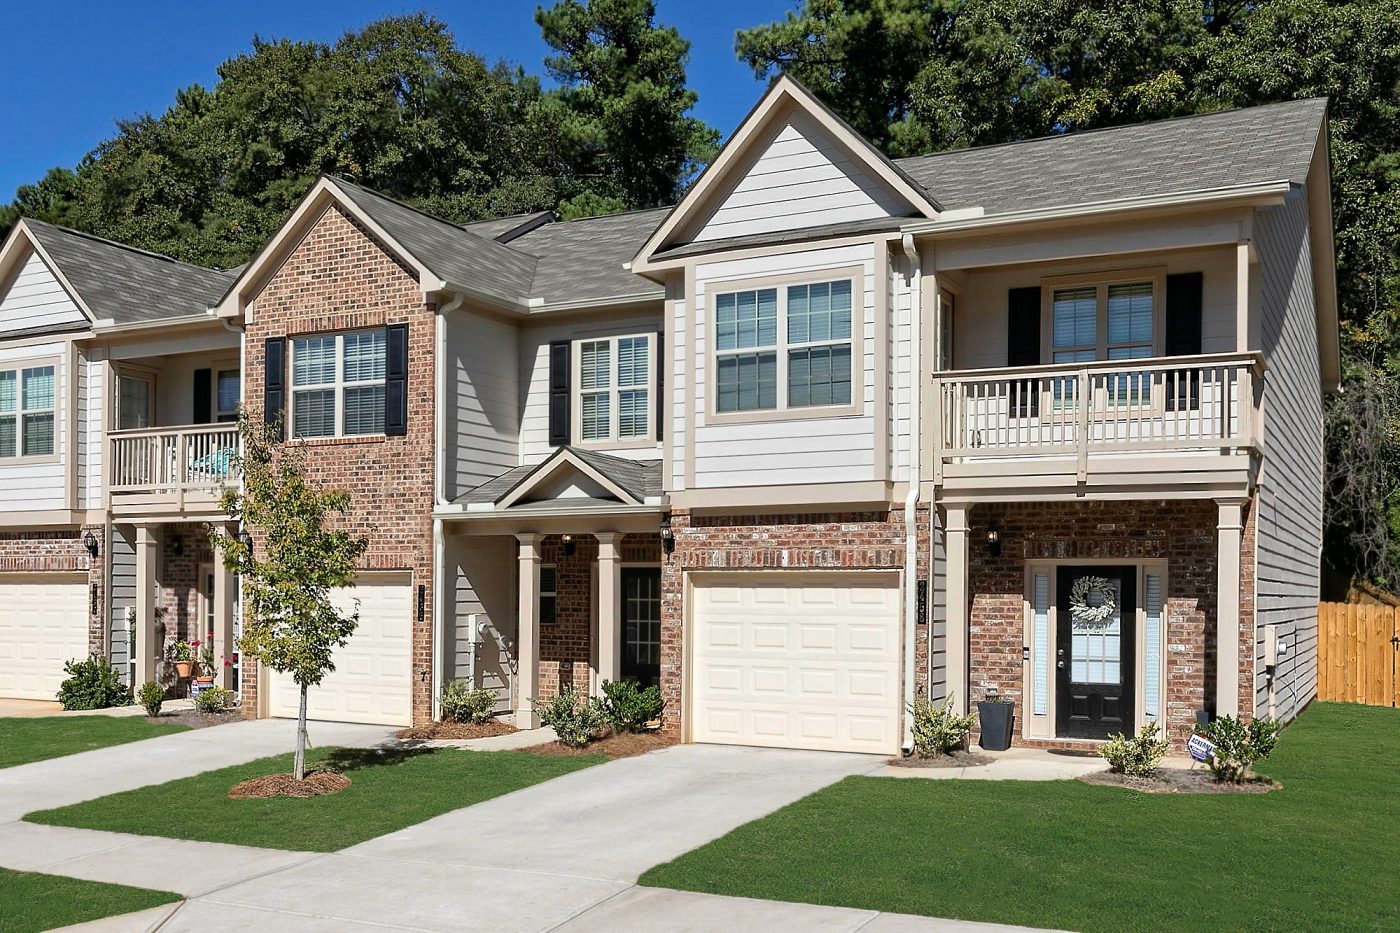 Townhomes for sale in covington georgia